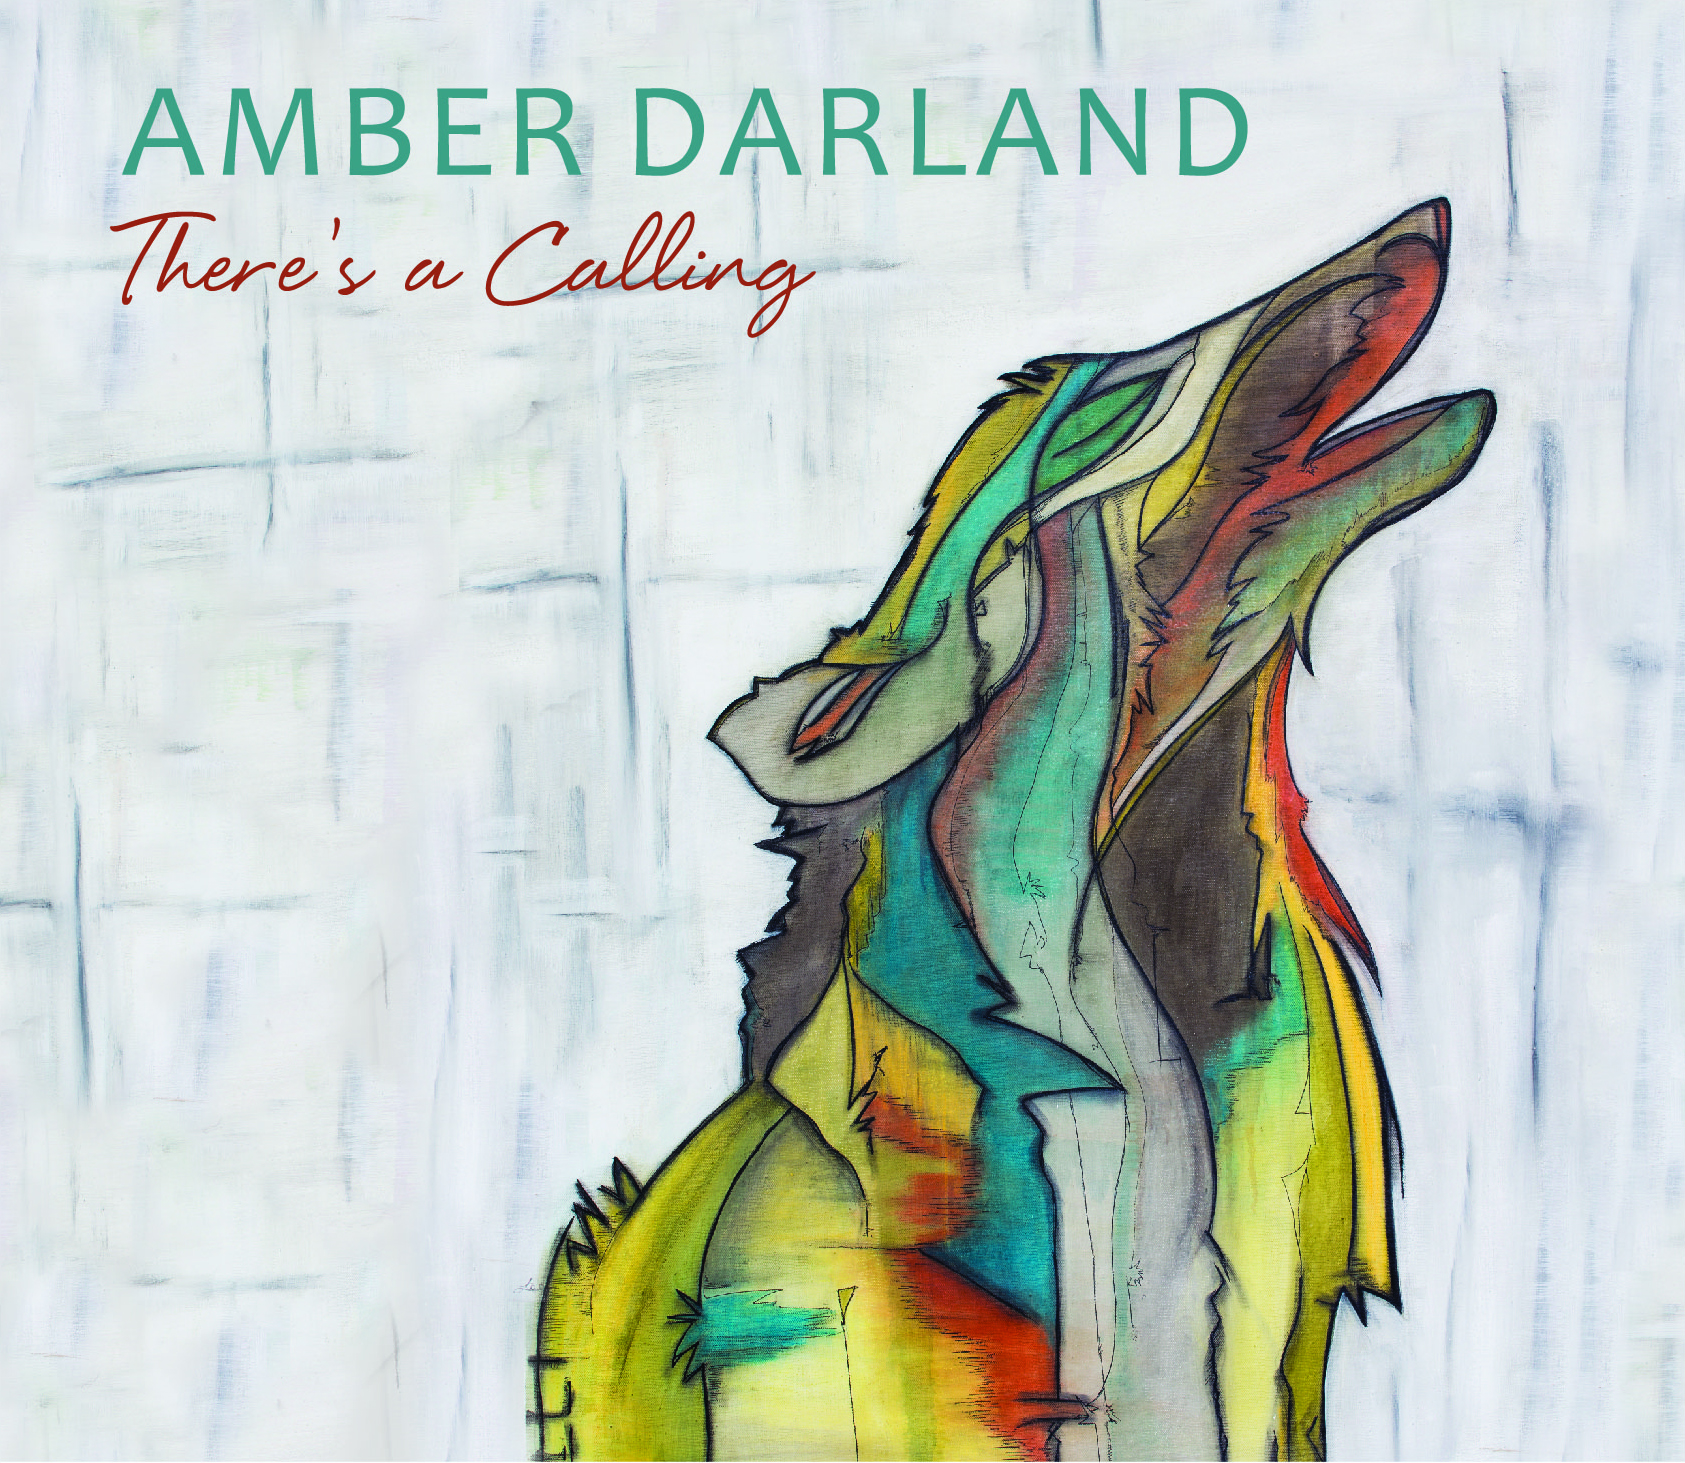 Art for There's a Calling by Amber Darland